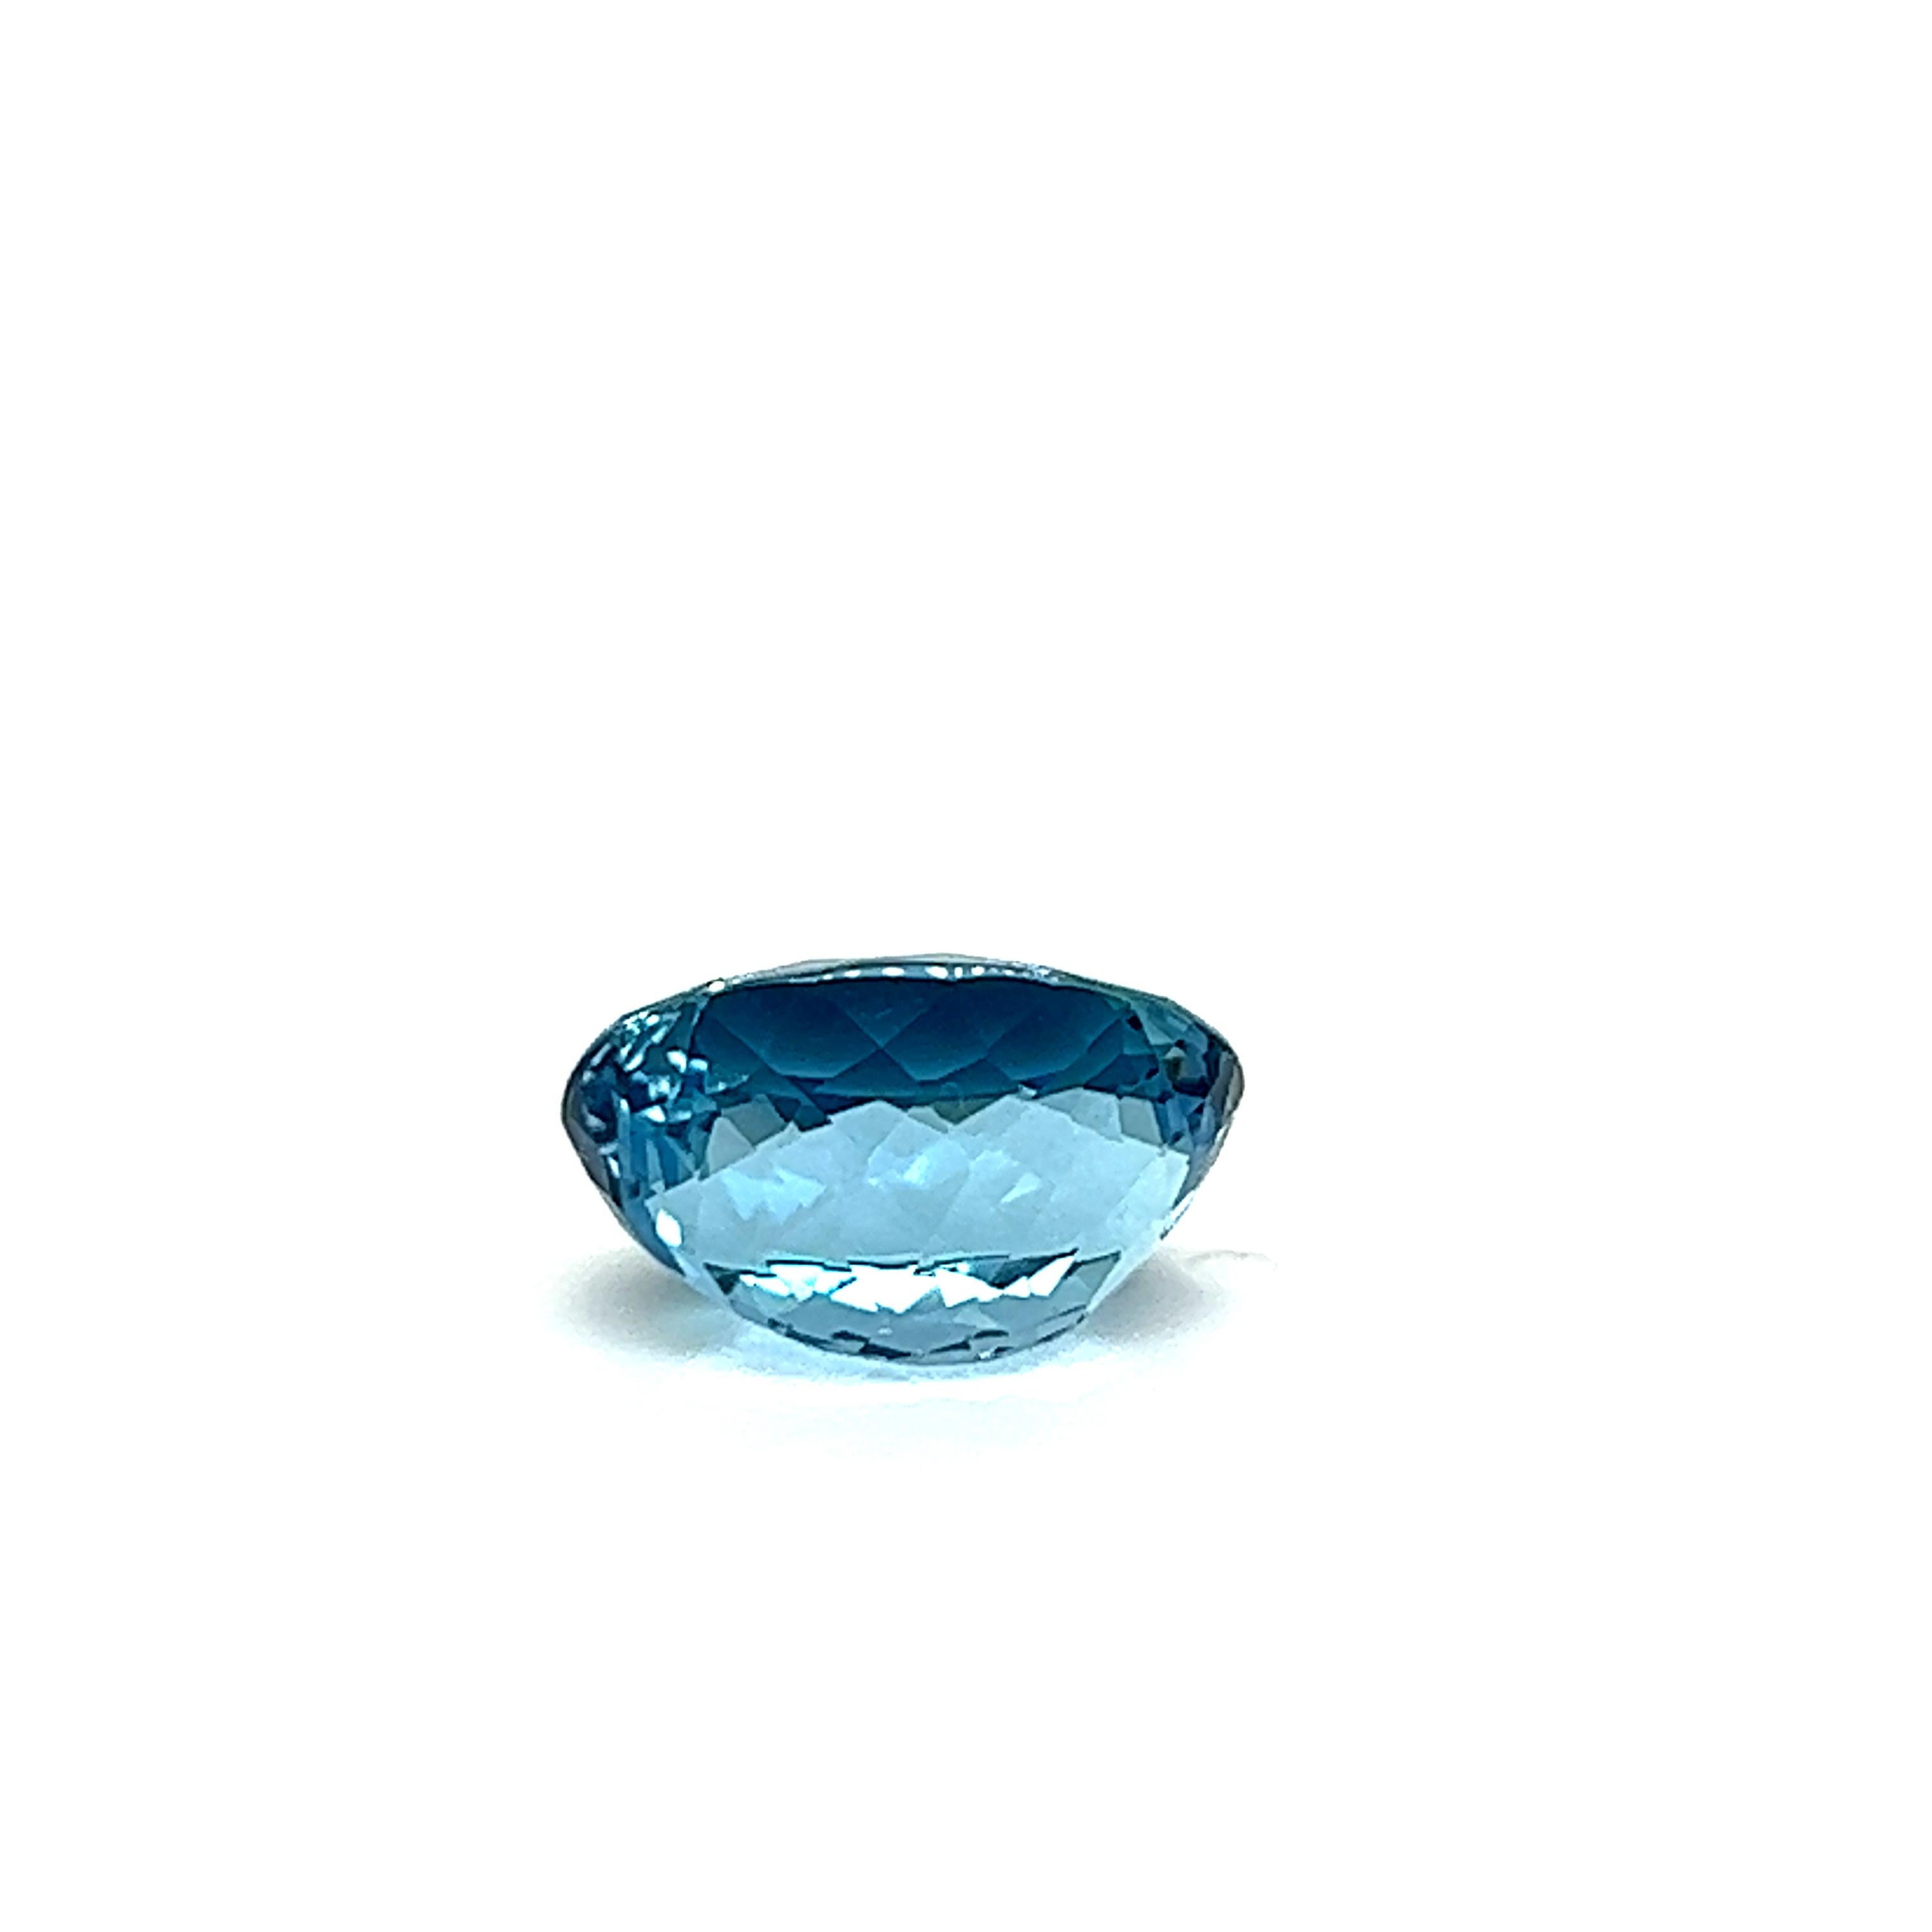 This one of a kind deep sea blue Santa Maria Aquamarine weighing 7.12 carats is absolutely stunning and is definitely a collectible piece. As with any aquamarine, this spectacular gem is free of internal inclusions and it has much more saturation